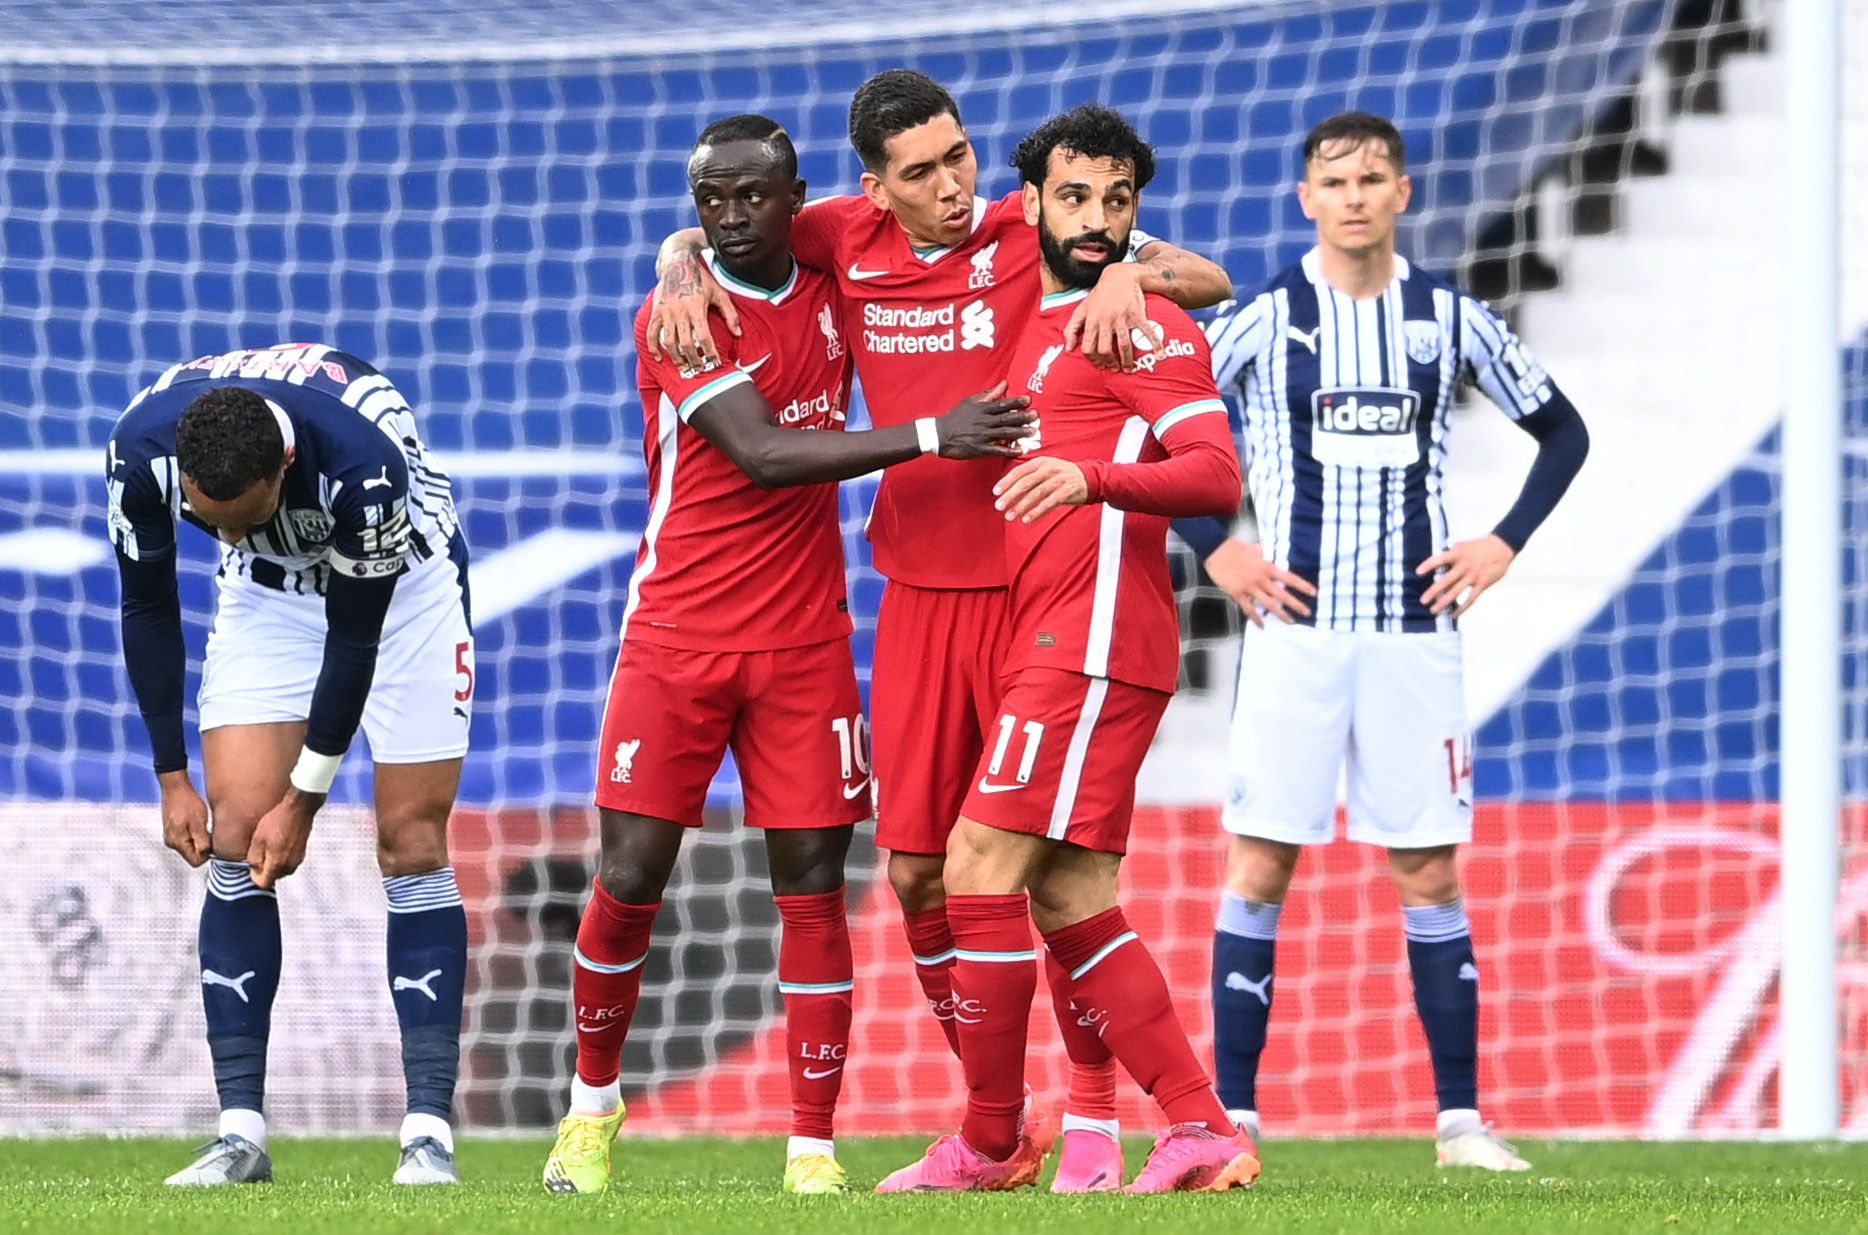 Soccer Football - Premier League - West Bromwich Albion v Liverpool - The Hawthorns, West Bromwich, Britain - May 16, 2021 Liverpool's Mohamed Salah celebrates scoring their first goal with Sadio Mane and Roberto Firmino Pool via REUTERS/Laurence Griffiths EDITORIAL USE ONLY. No use with unauthorized audio, video, data, fixture lists, club/league logos or 'live' services. Online in-match use limited to 75 images, no video emulation. No use in betting, games or single club /league/player publicat